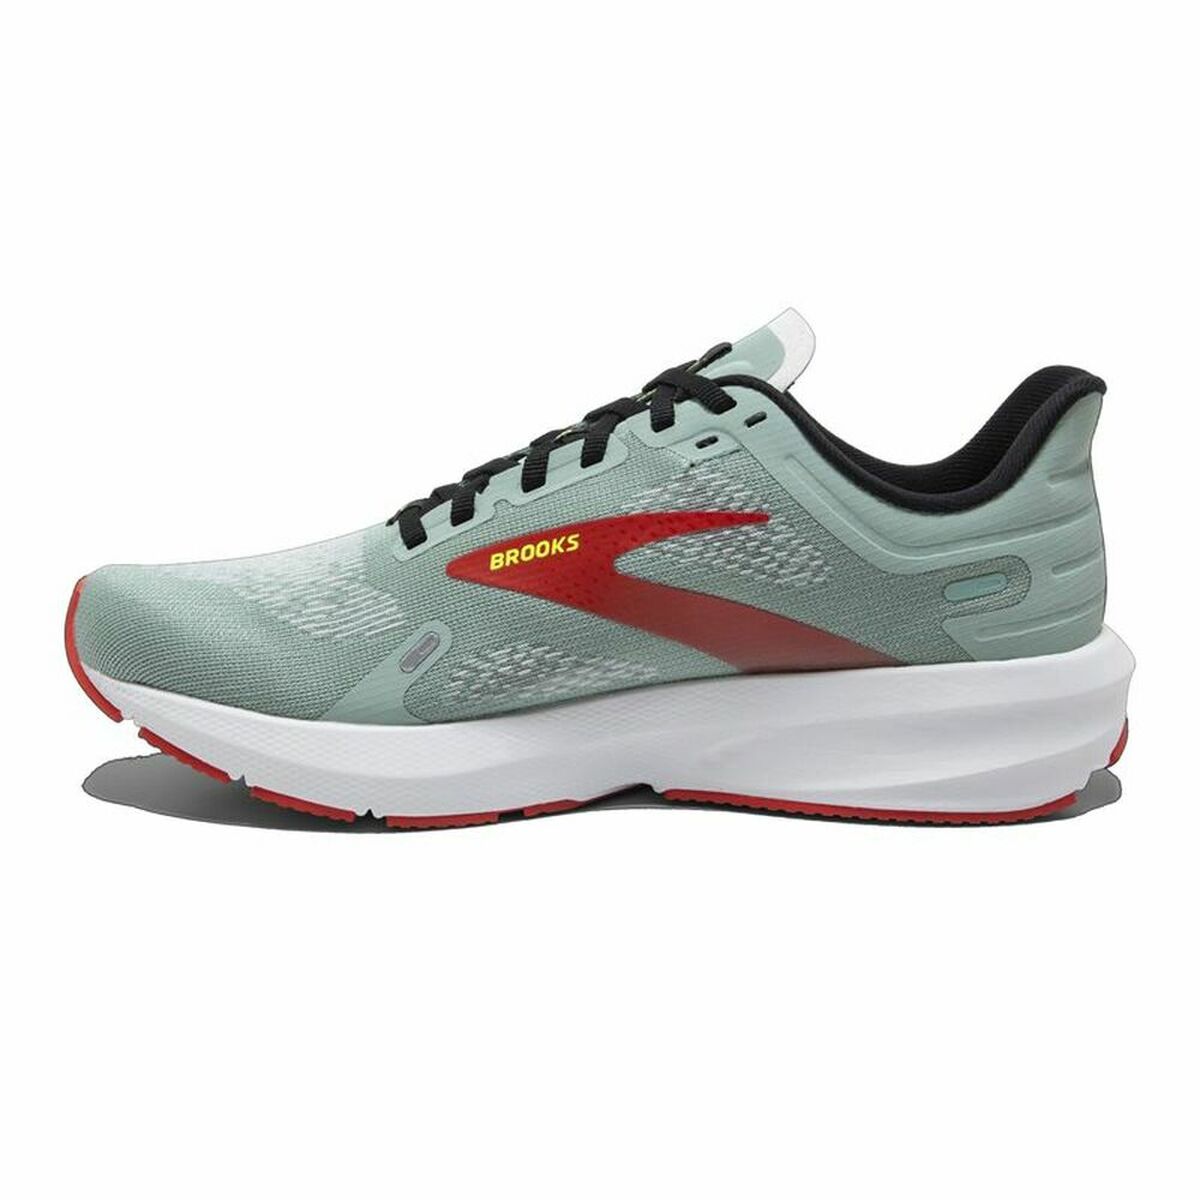 Sports Trainers for Women Brooks Launch 9 38 Blue